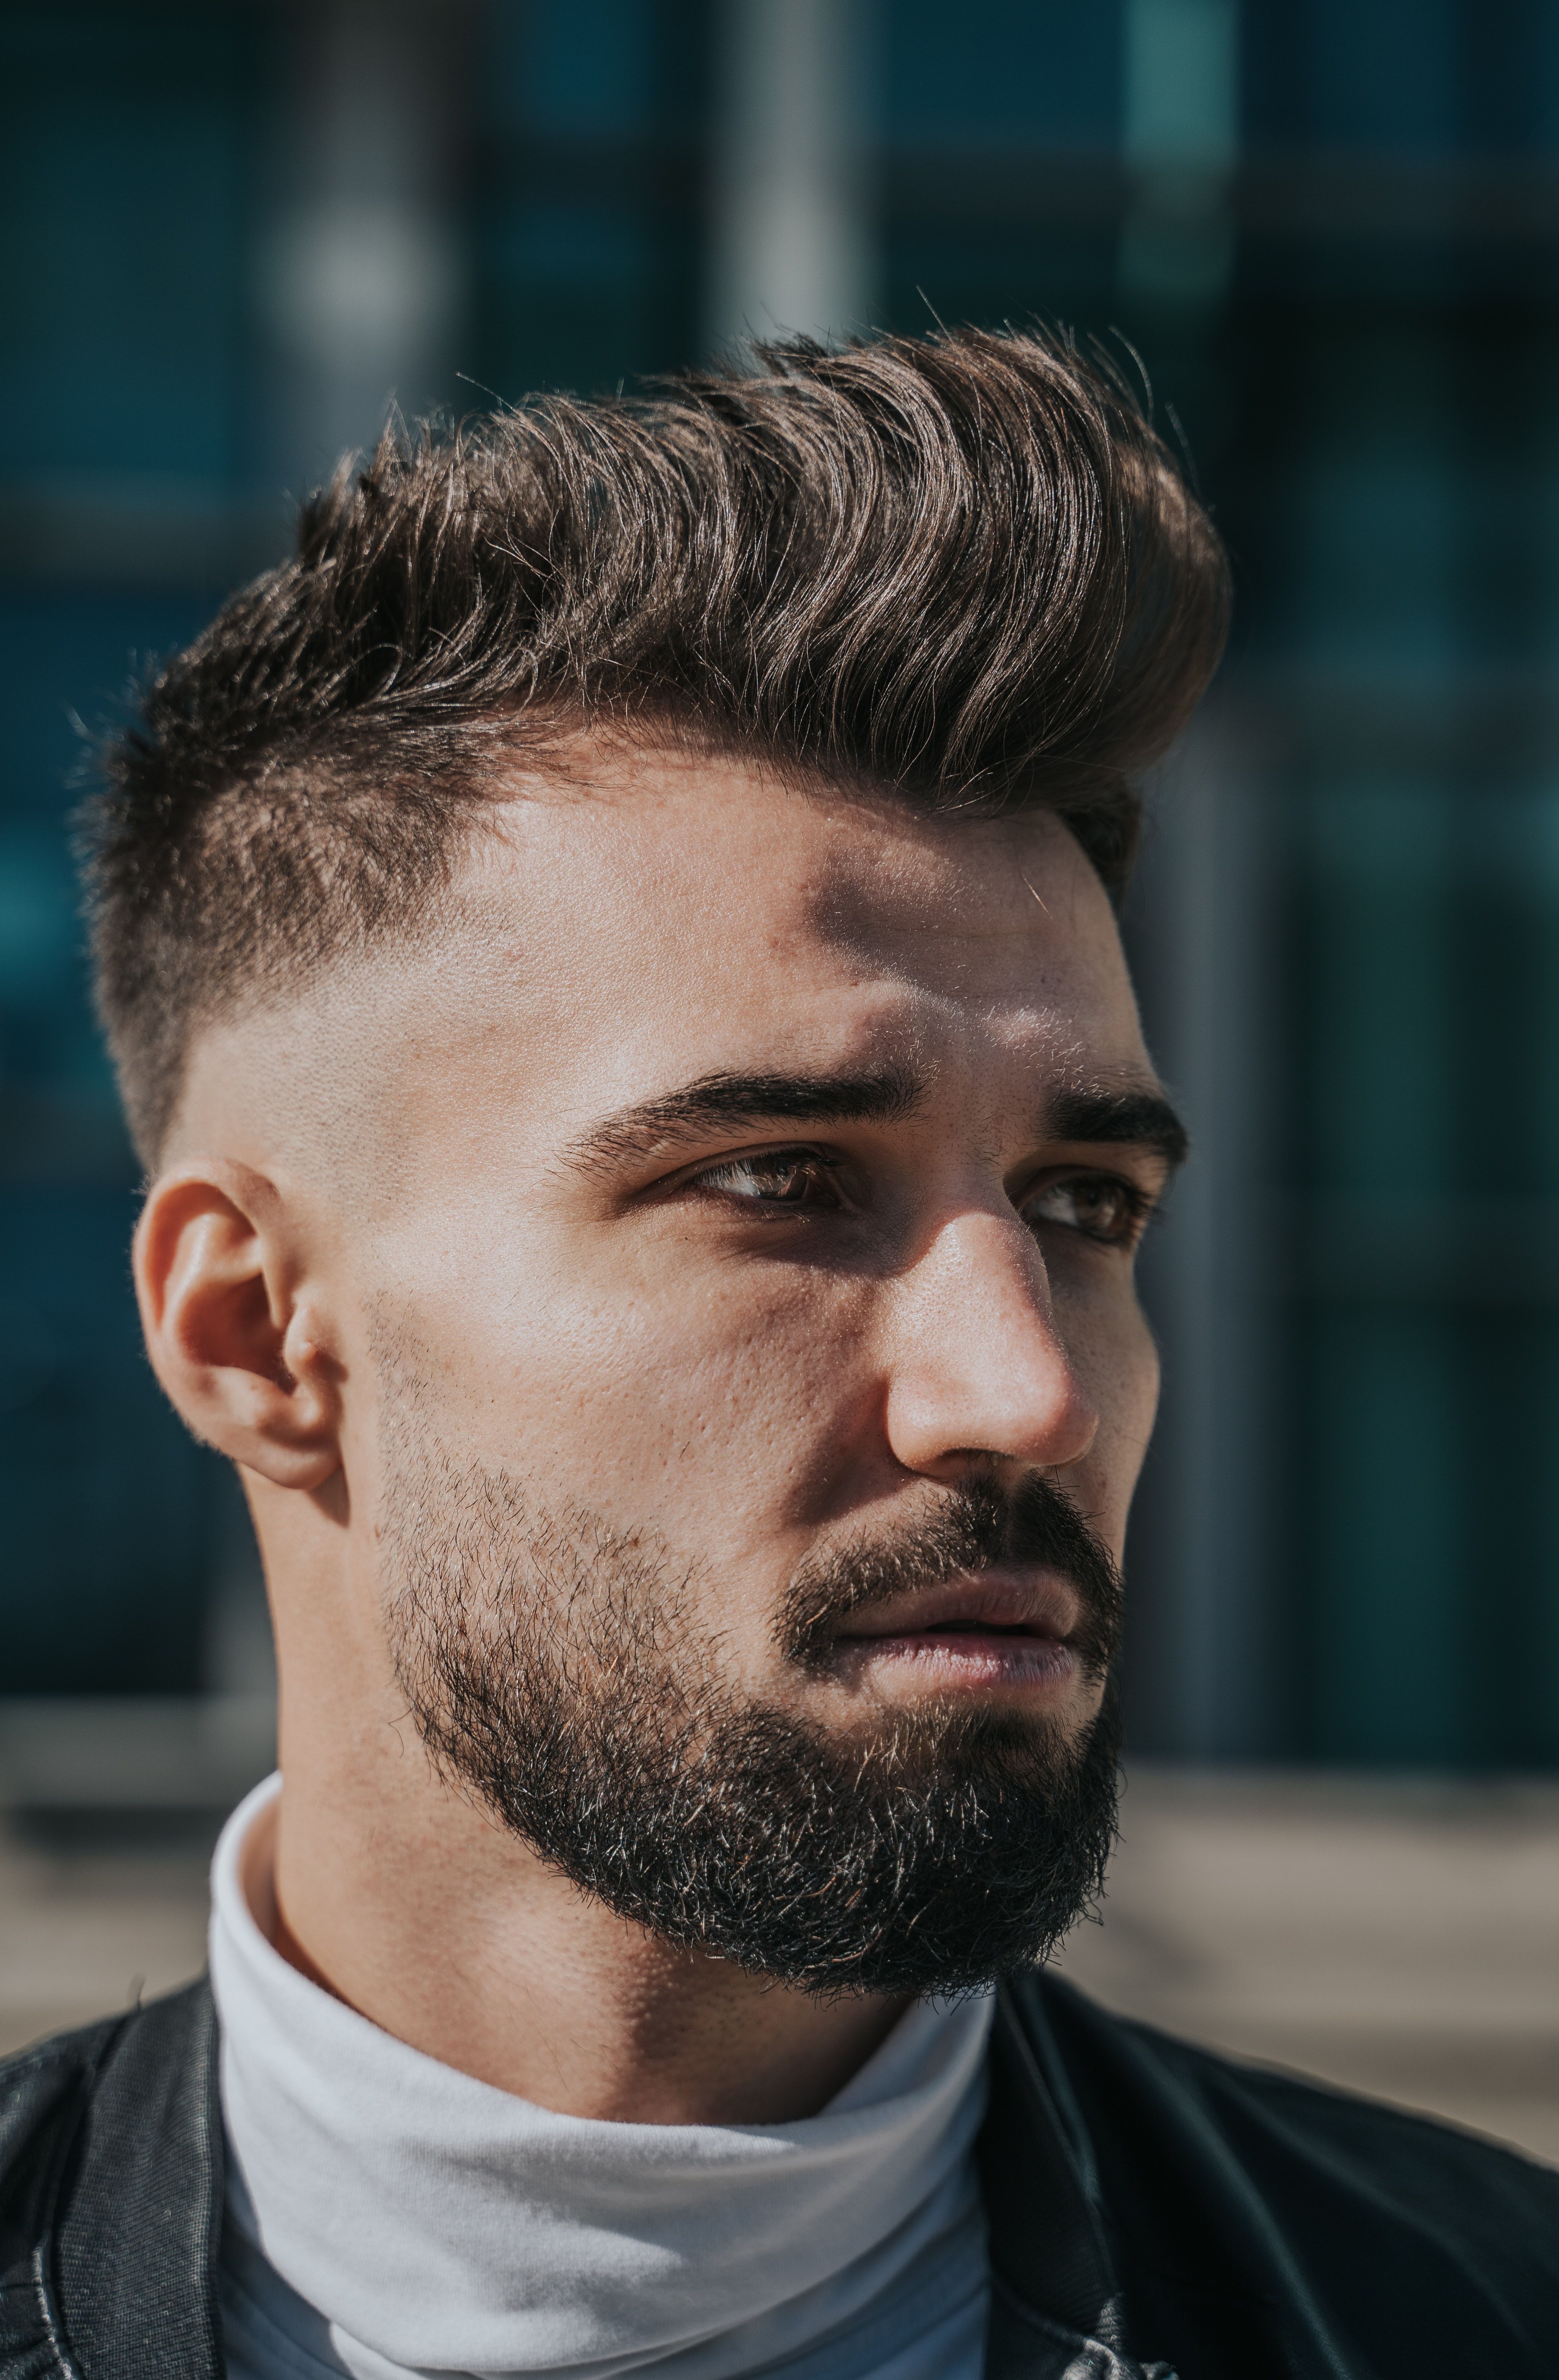 Sporty Haircut Styles Looks to Inspire Your Next Cut  All Things Hair US